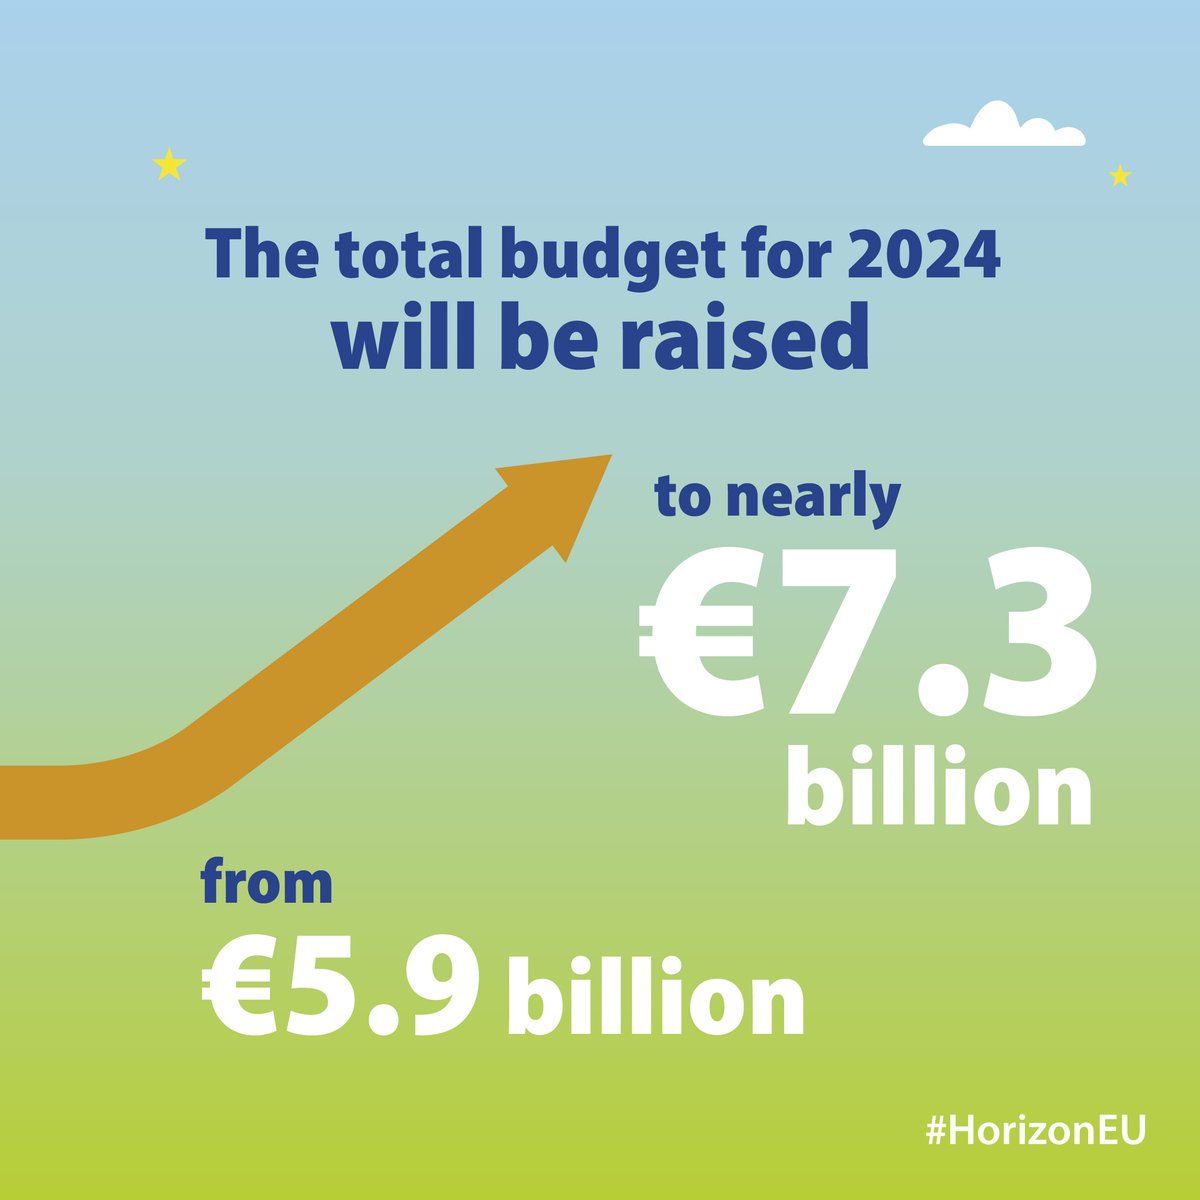 There's a total of €7.3 billion available under #HorizonEU in 2024 🇪🇺 And @REA_research we plan on investing over €3 billion on behalf of the EU in R&I in 2024, as well as in the other programmes we manage! Find out how to unlock EU funding this year: europa.eu/!nf96Gb